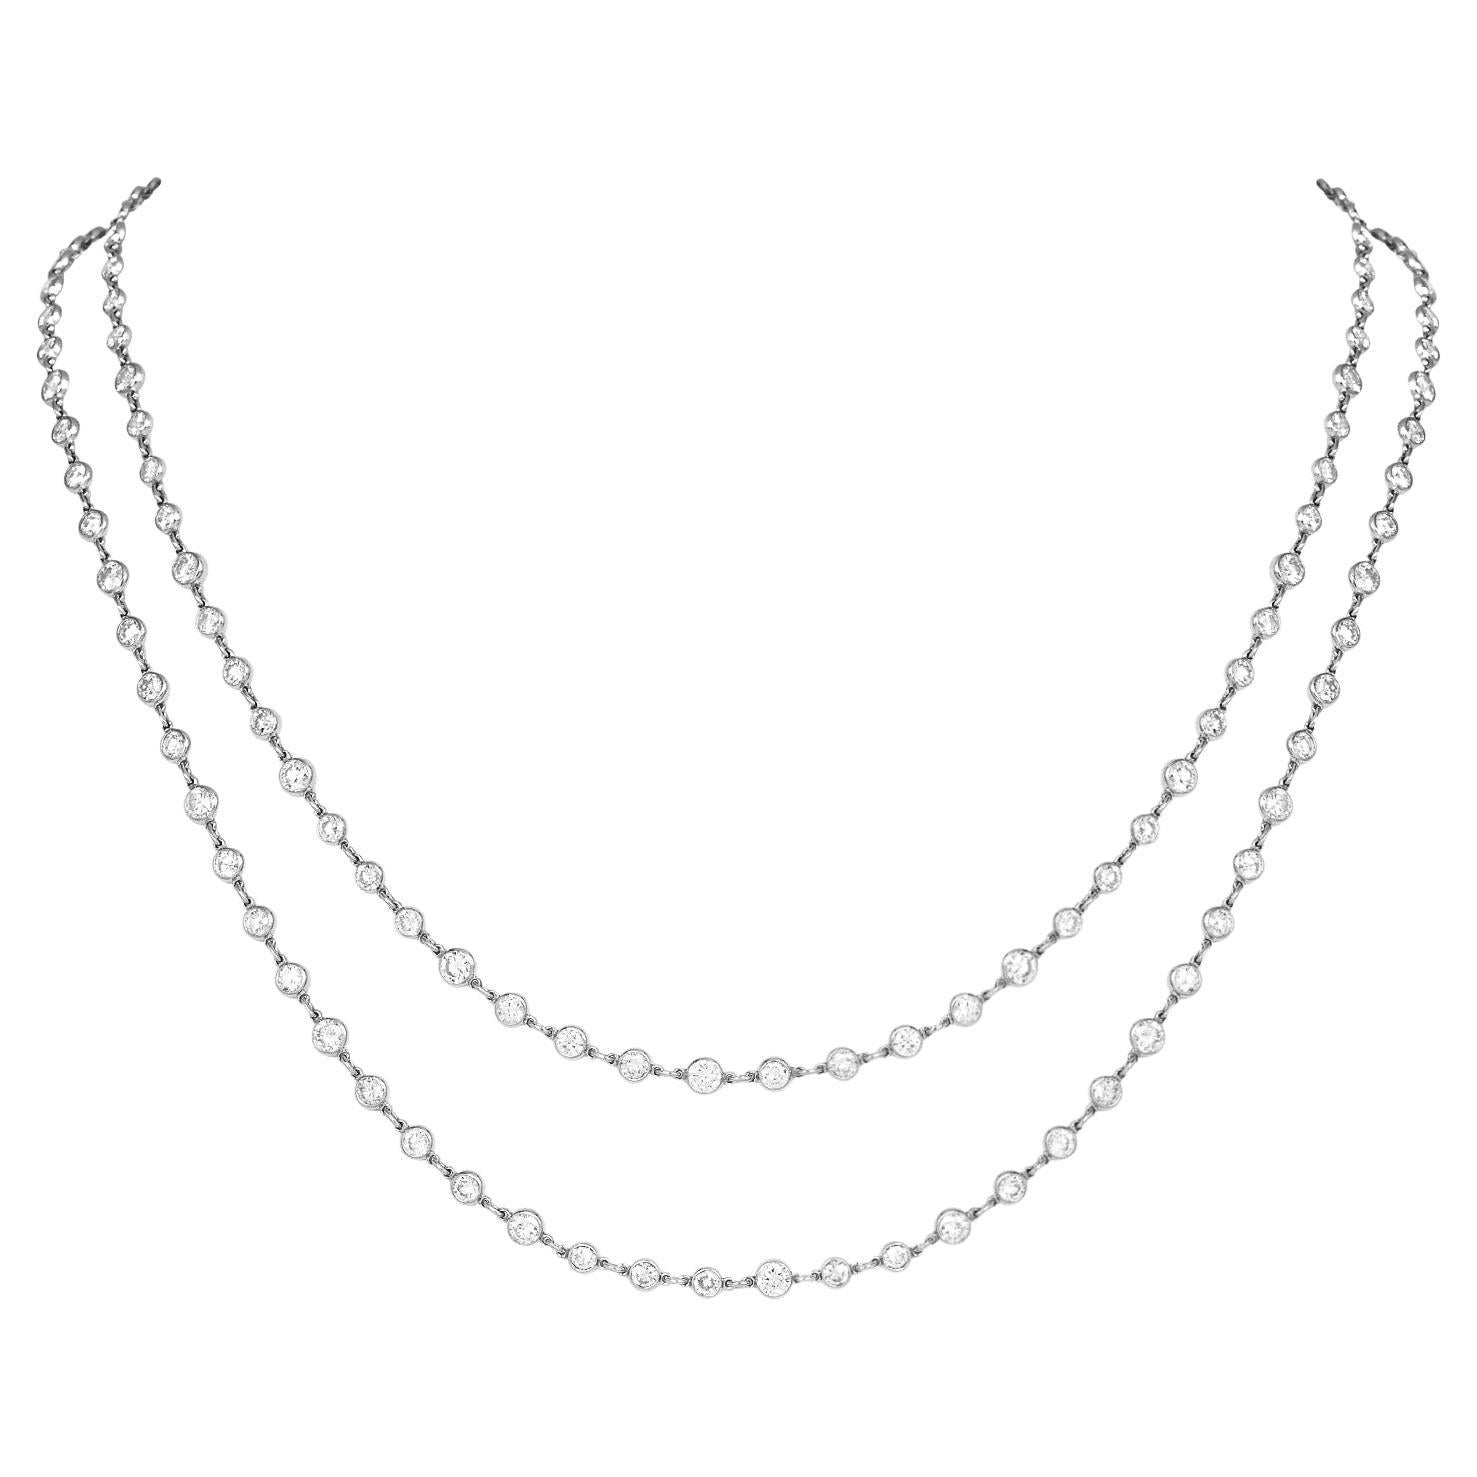 18.15 Carats Diamond by the Yard Platinum Chain Necklace 